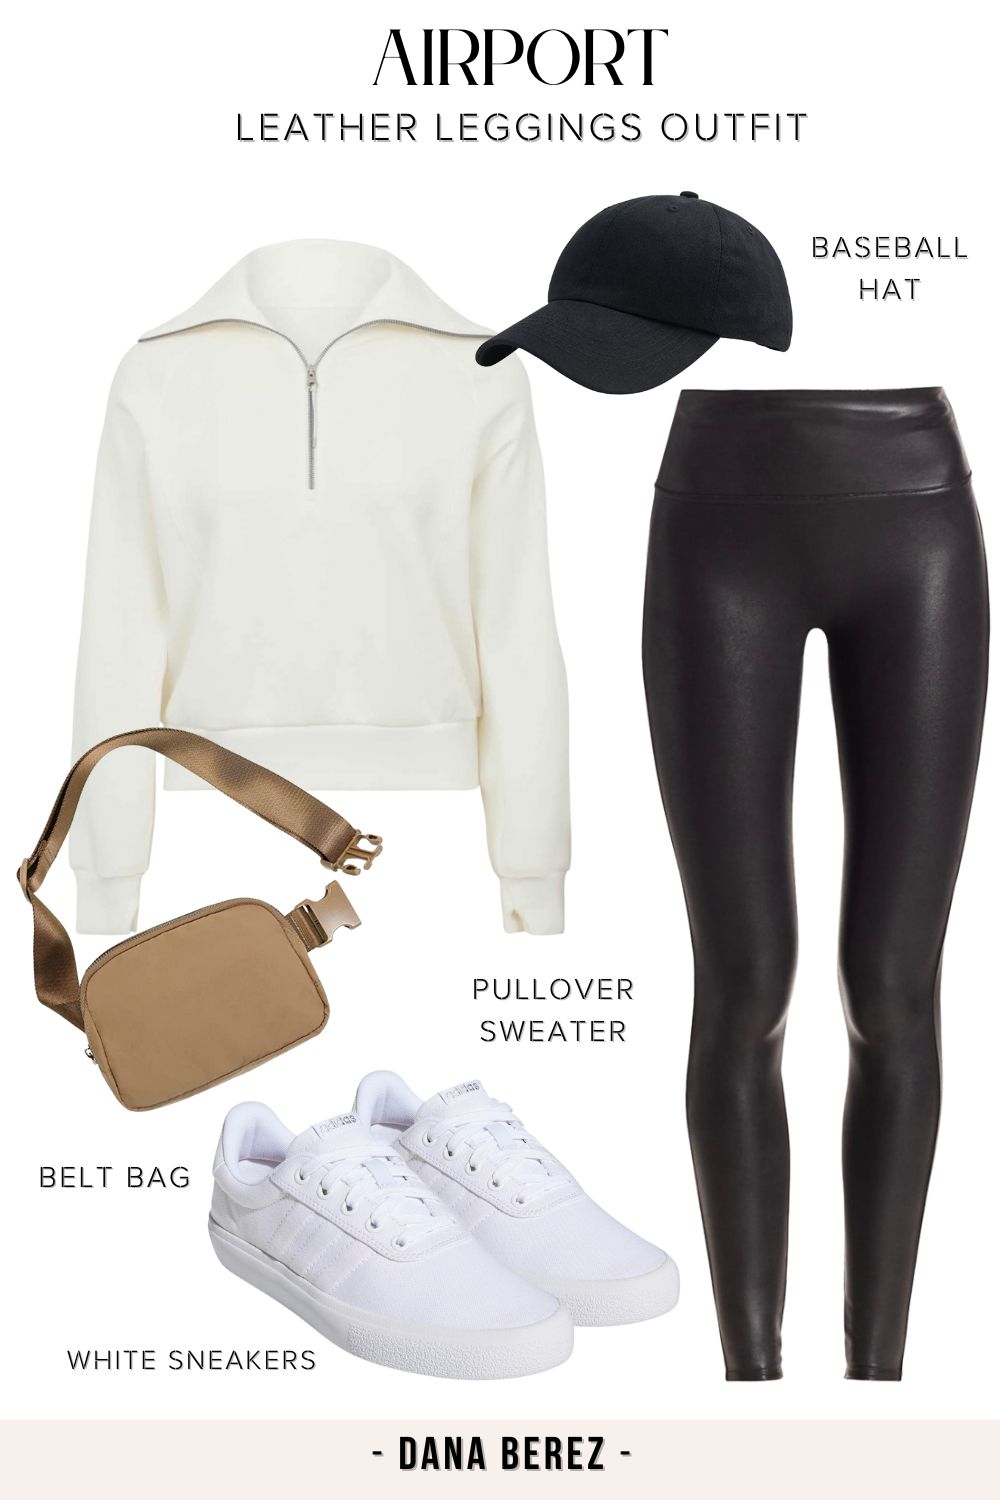 Leather Leggings Airport Outfit